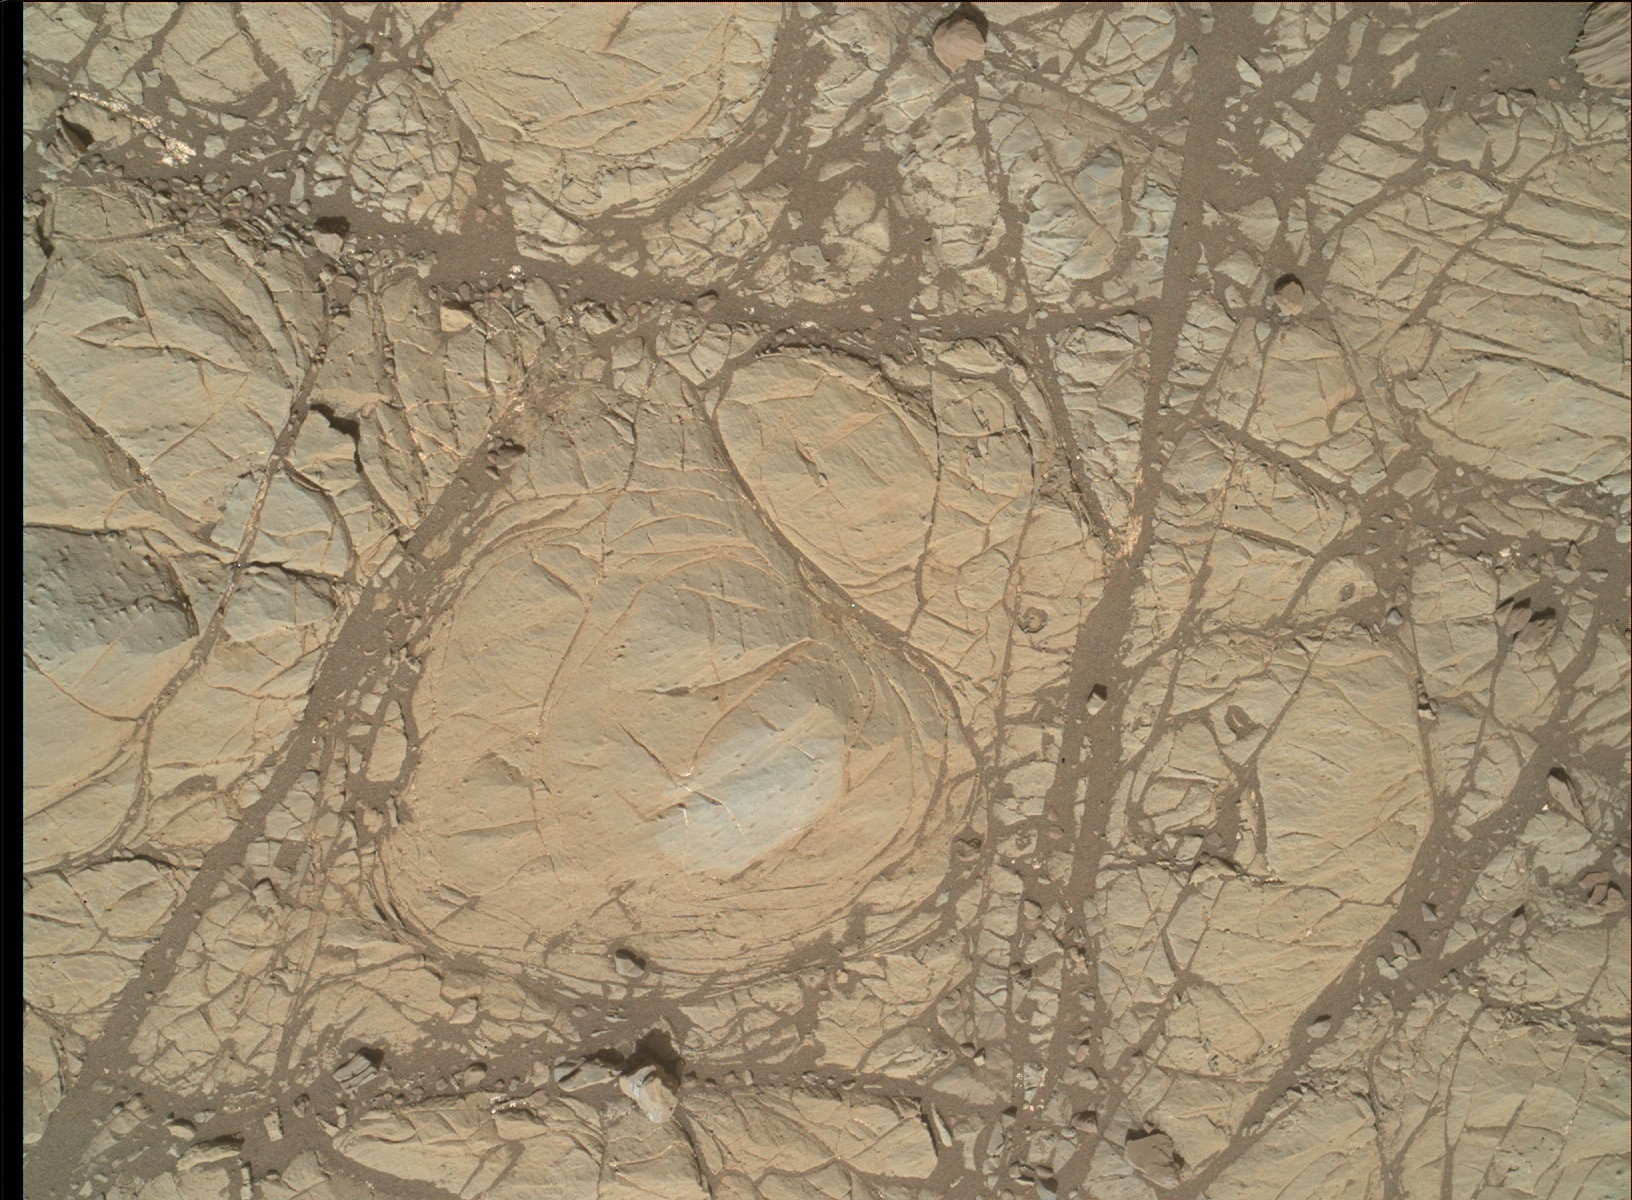 Nasa's Mars rover Curiosity acquired this image using its Mars Hand Lens Imager (MAHLI) on Sol 1904